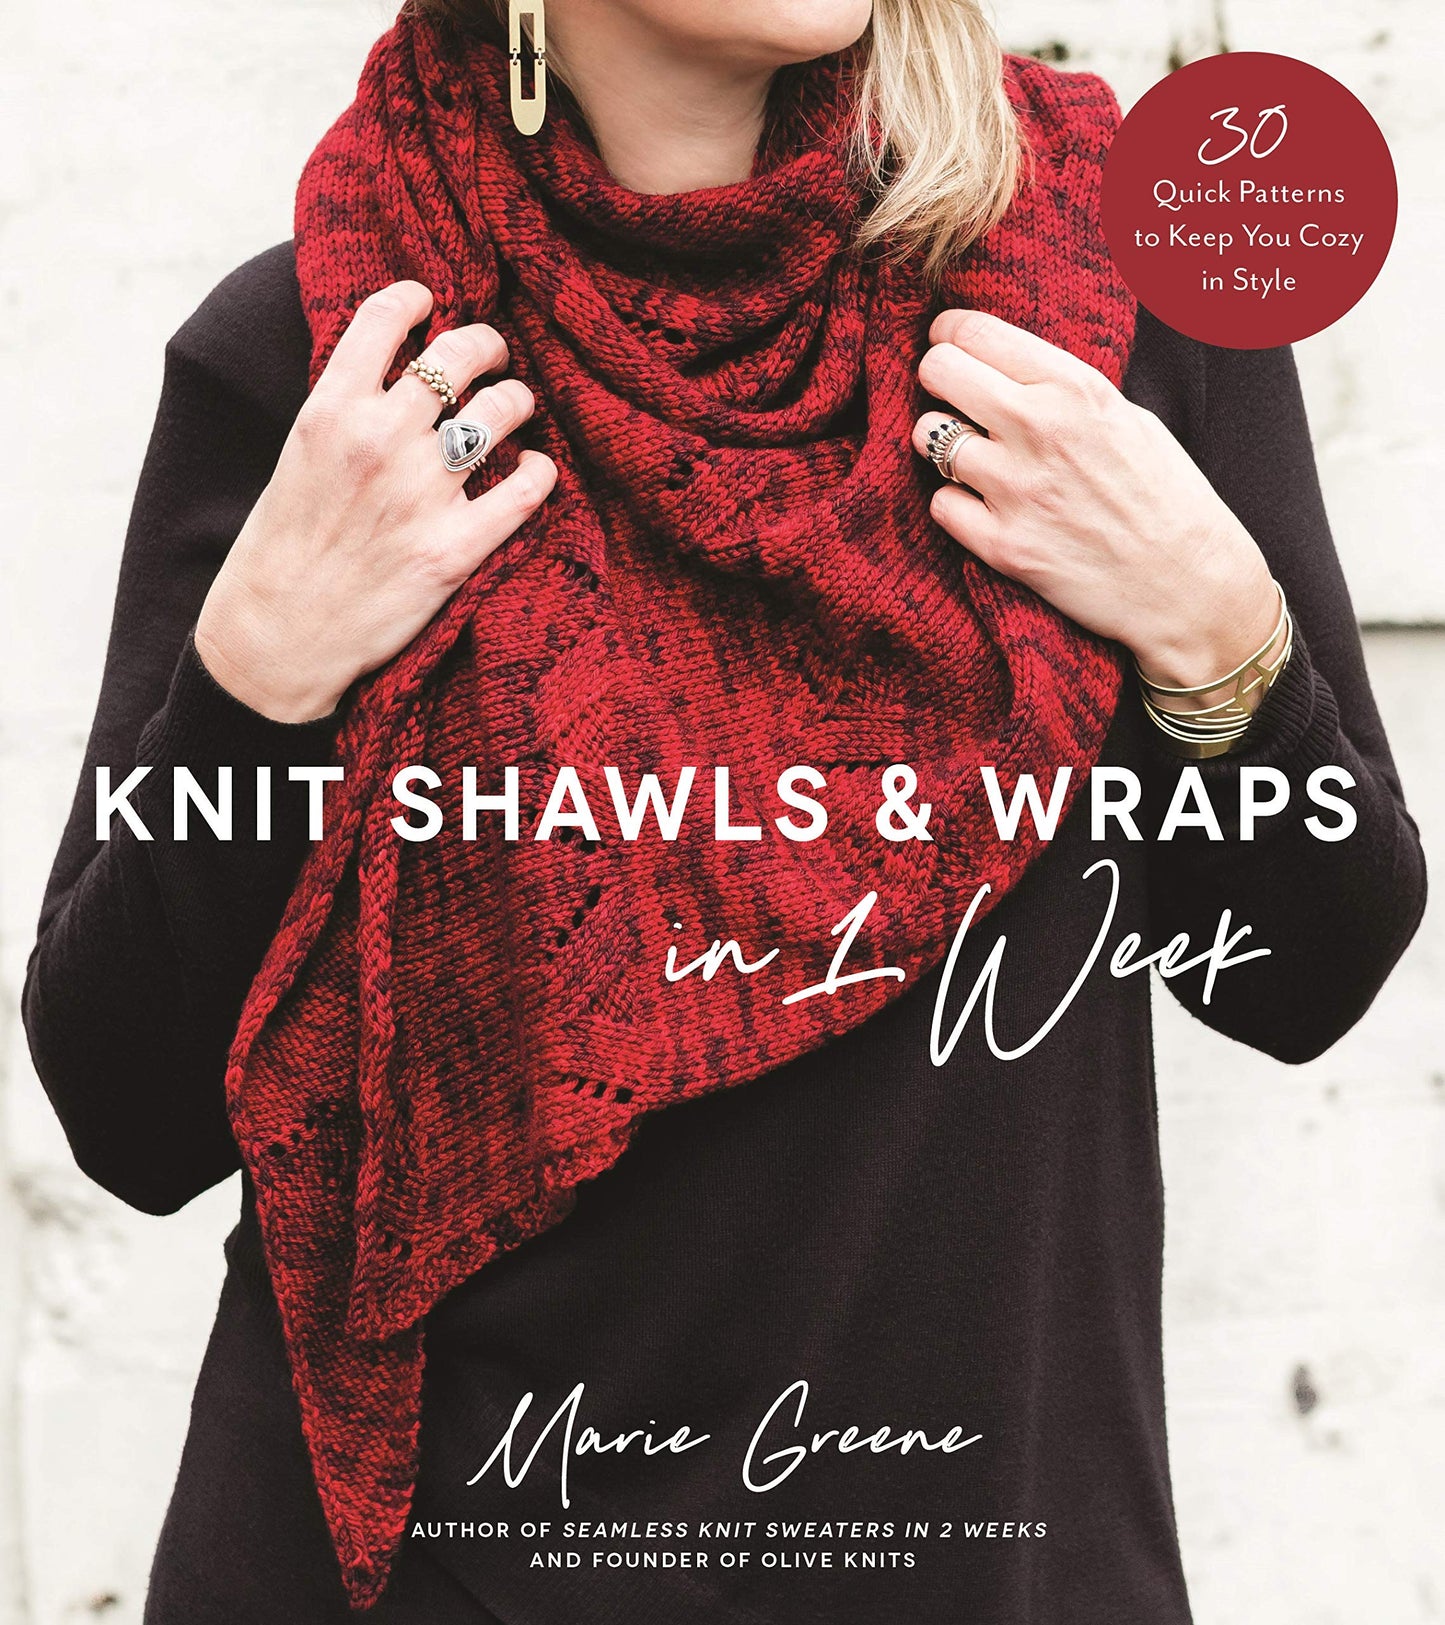 Knit Shawls and Wraps in 1 Week